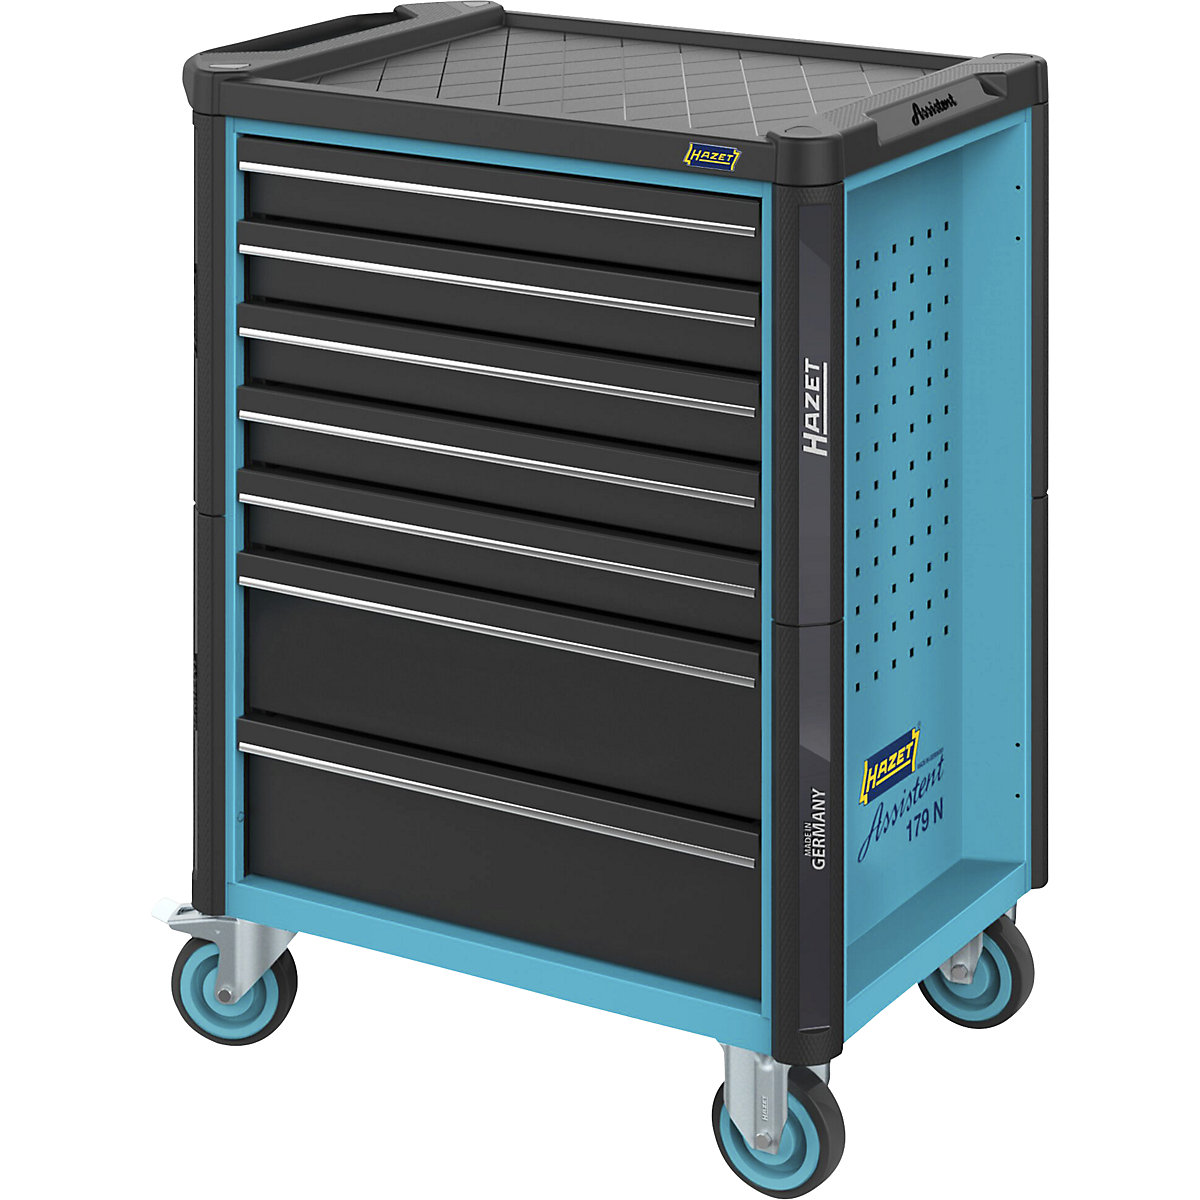 ASSISTENT 179N tool trolley – HAZET (Product illustration 8)-7